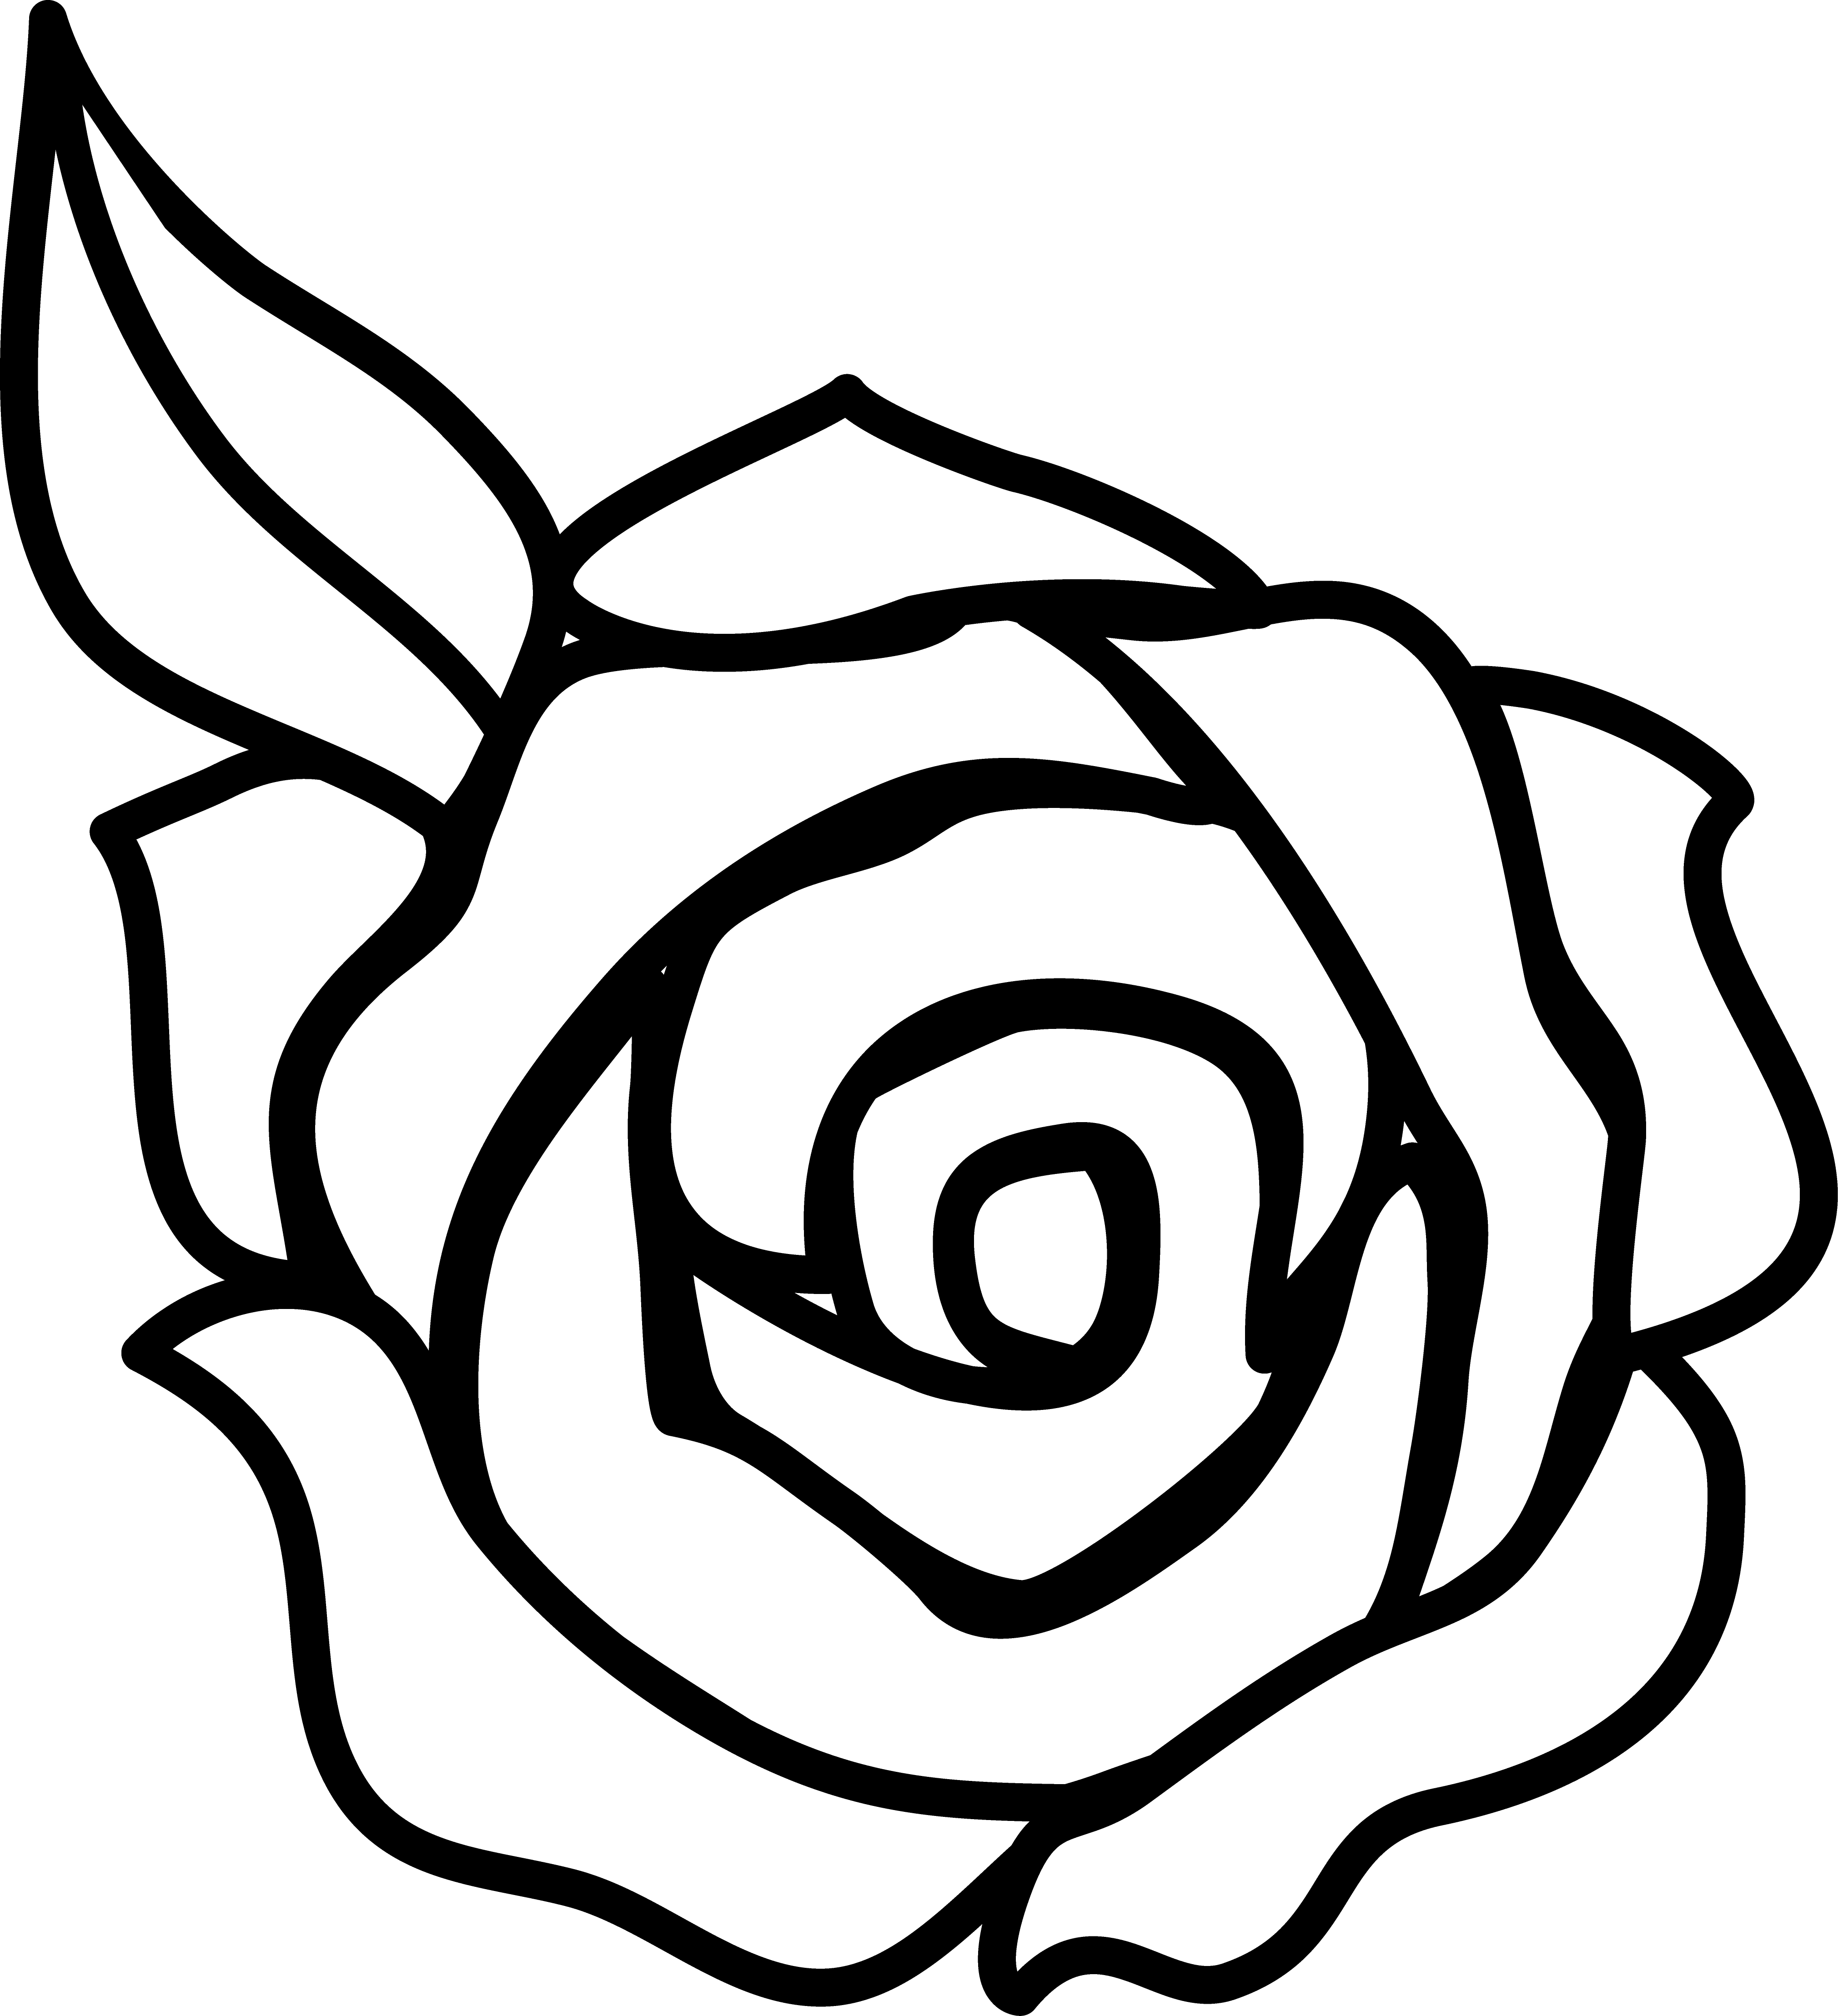 Rose border clip art. Engineering clipart black and white